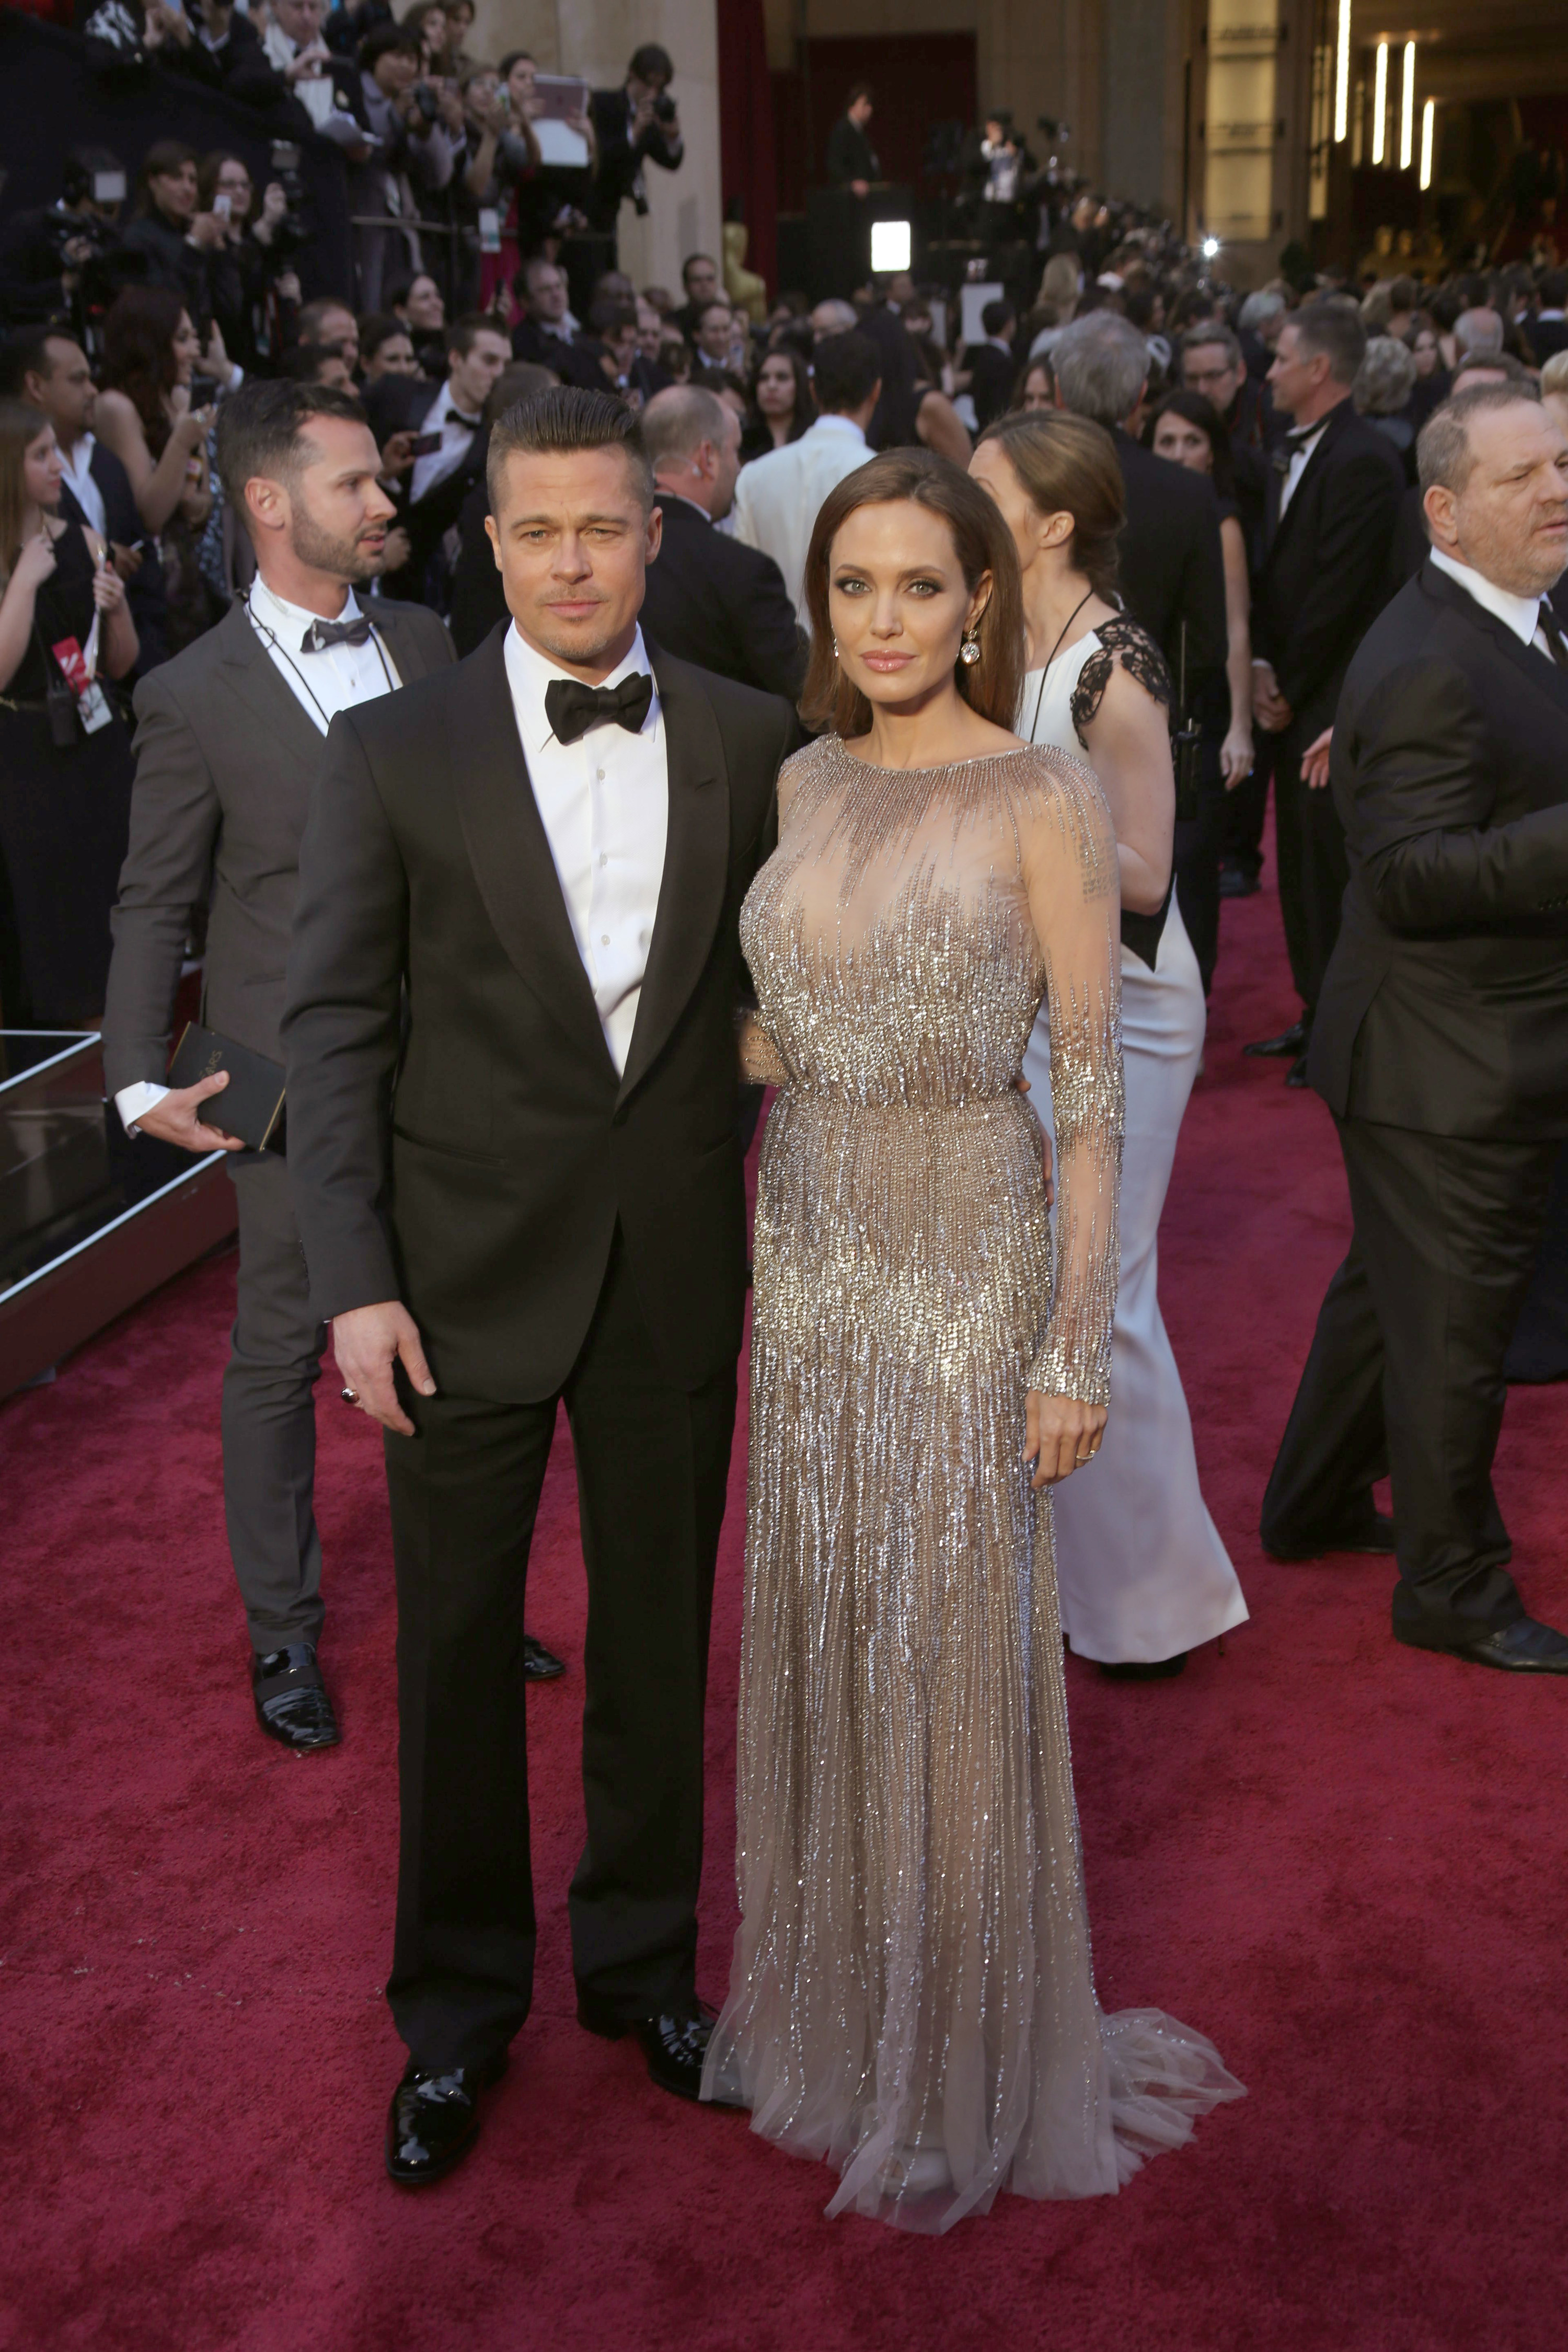 Brad and Angelina on the red carpet